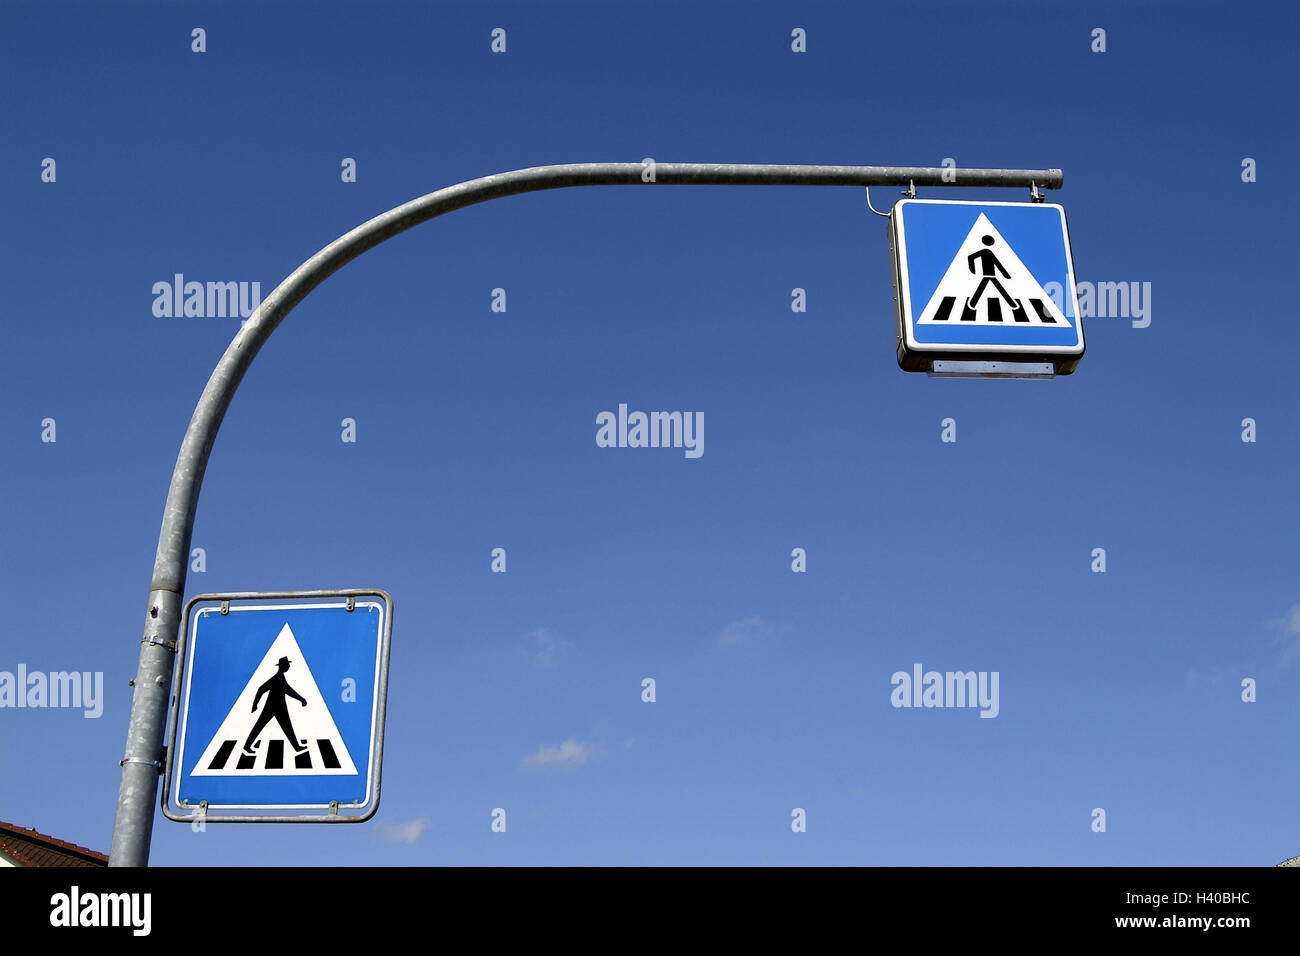 Road signs, pedestrian's crossing, signs, traffic signs, sign, tip, crosswalk, traffic control, icon, pedestrian, go, crossing, Überweg, regulation, security, road safety Stock Photo